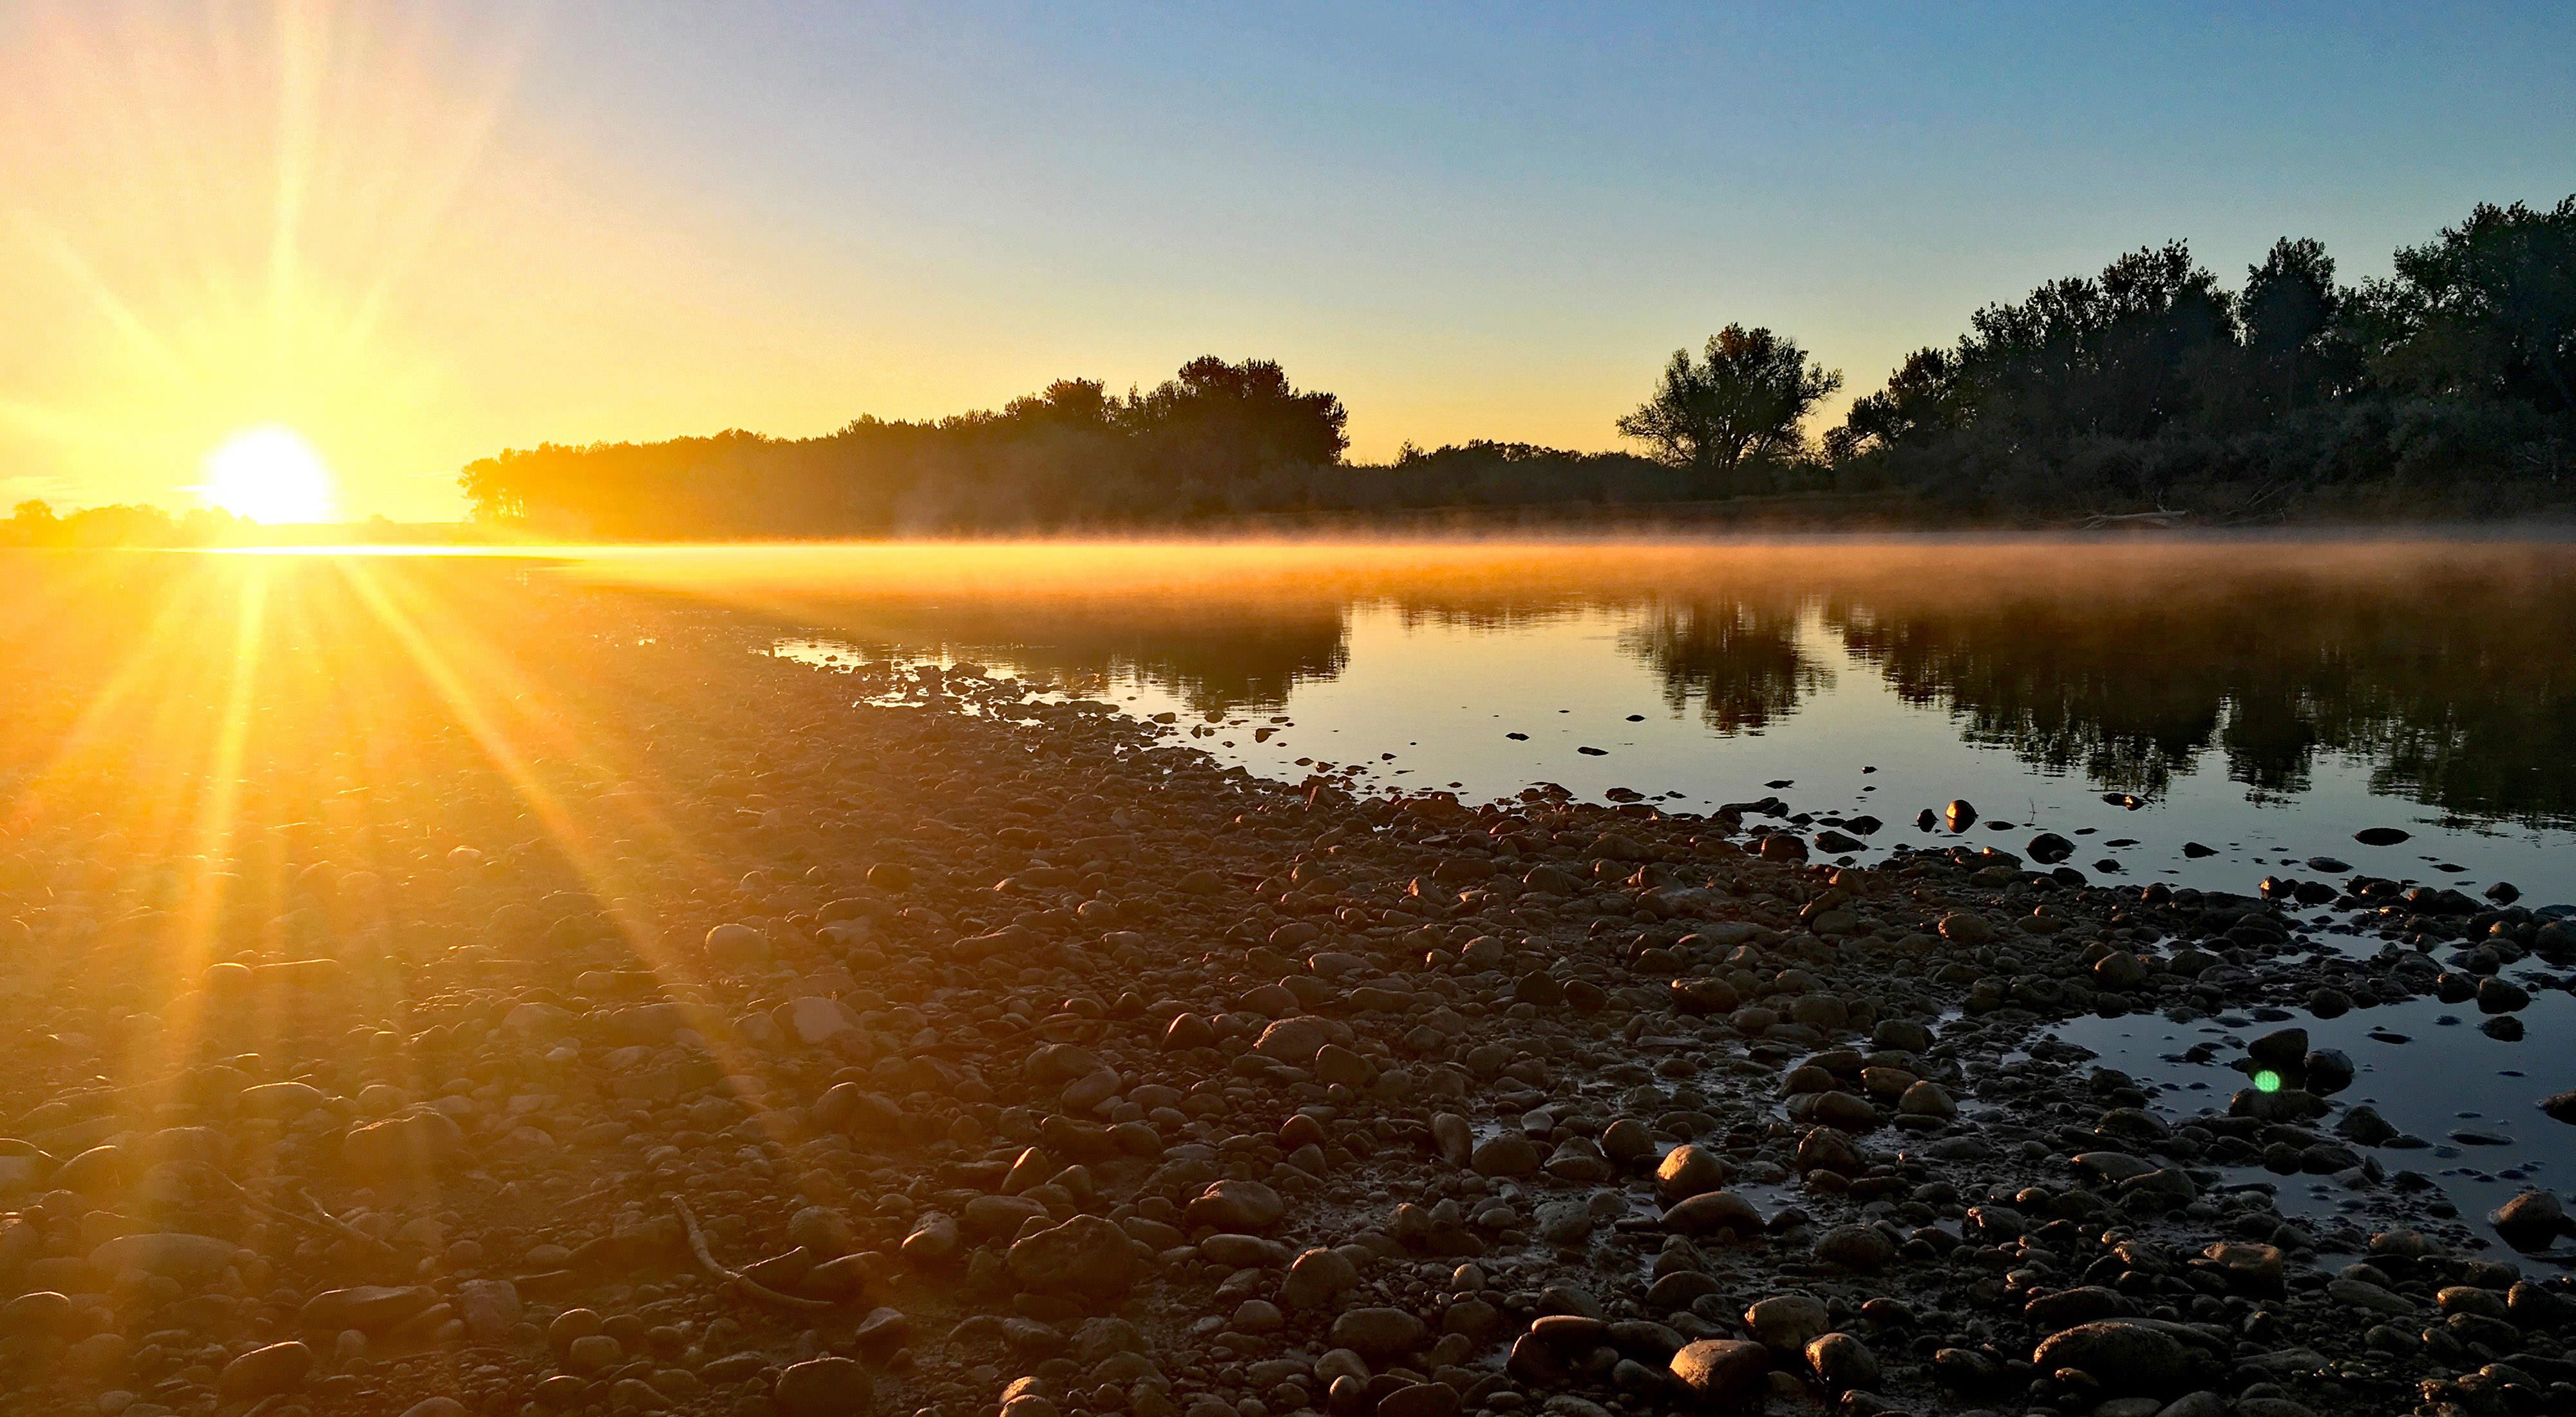 Sun rising over the Yellowstone River with views of the river and surrounding treeline.